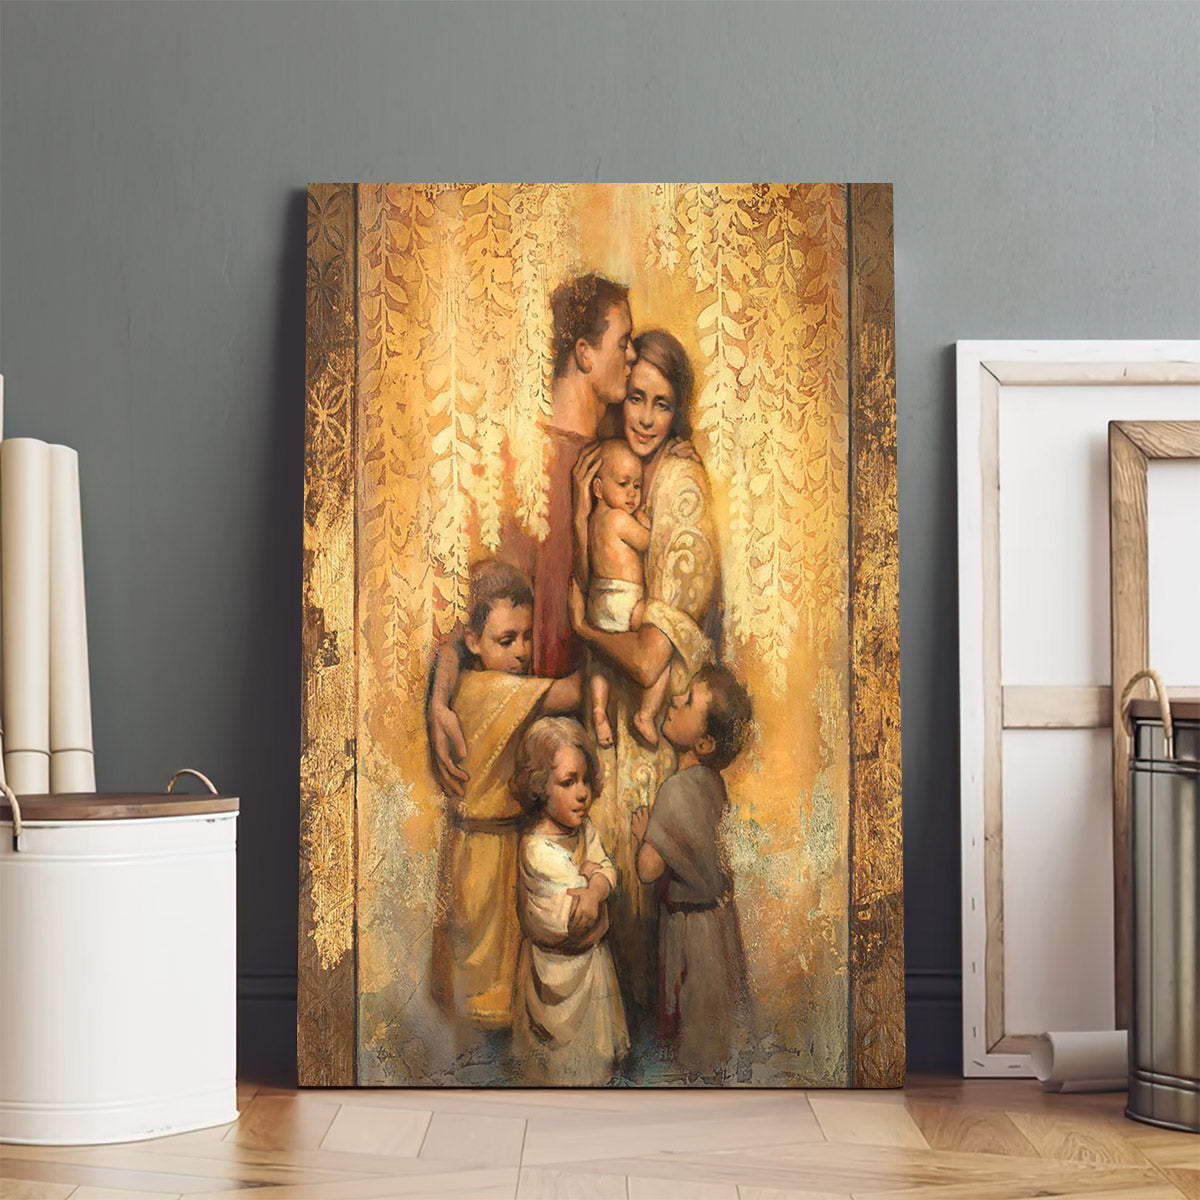 Family Canvas Picture - Jesus Canvas Wall Art - Christian Wall Art